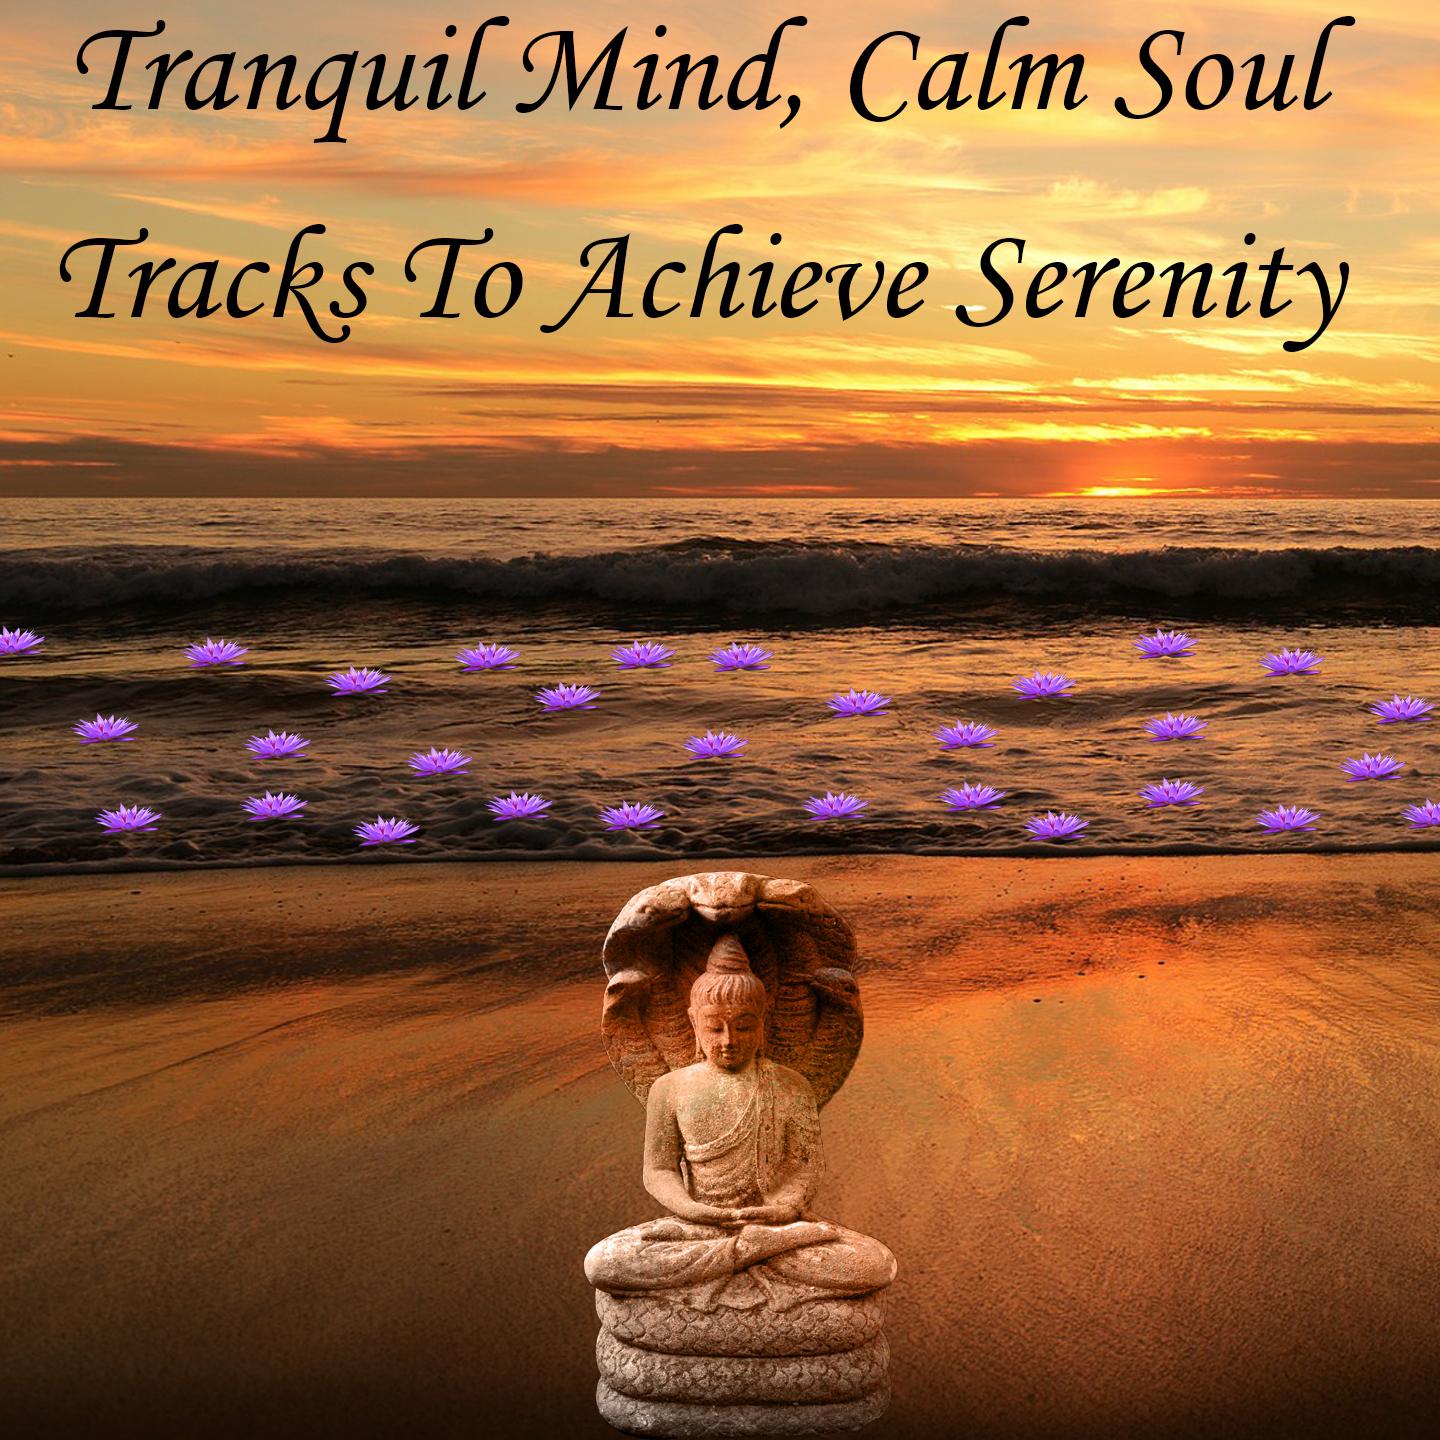 Tranquil Mind, Calm Soul Tracks To Achieve Serenity